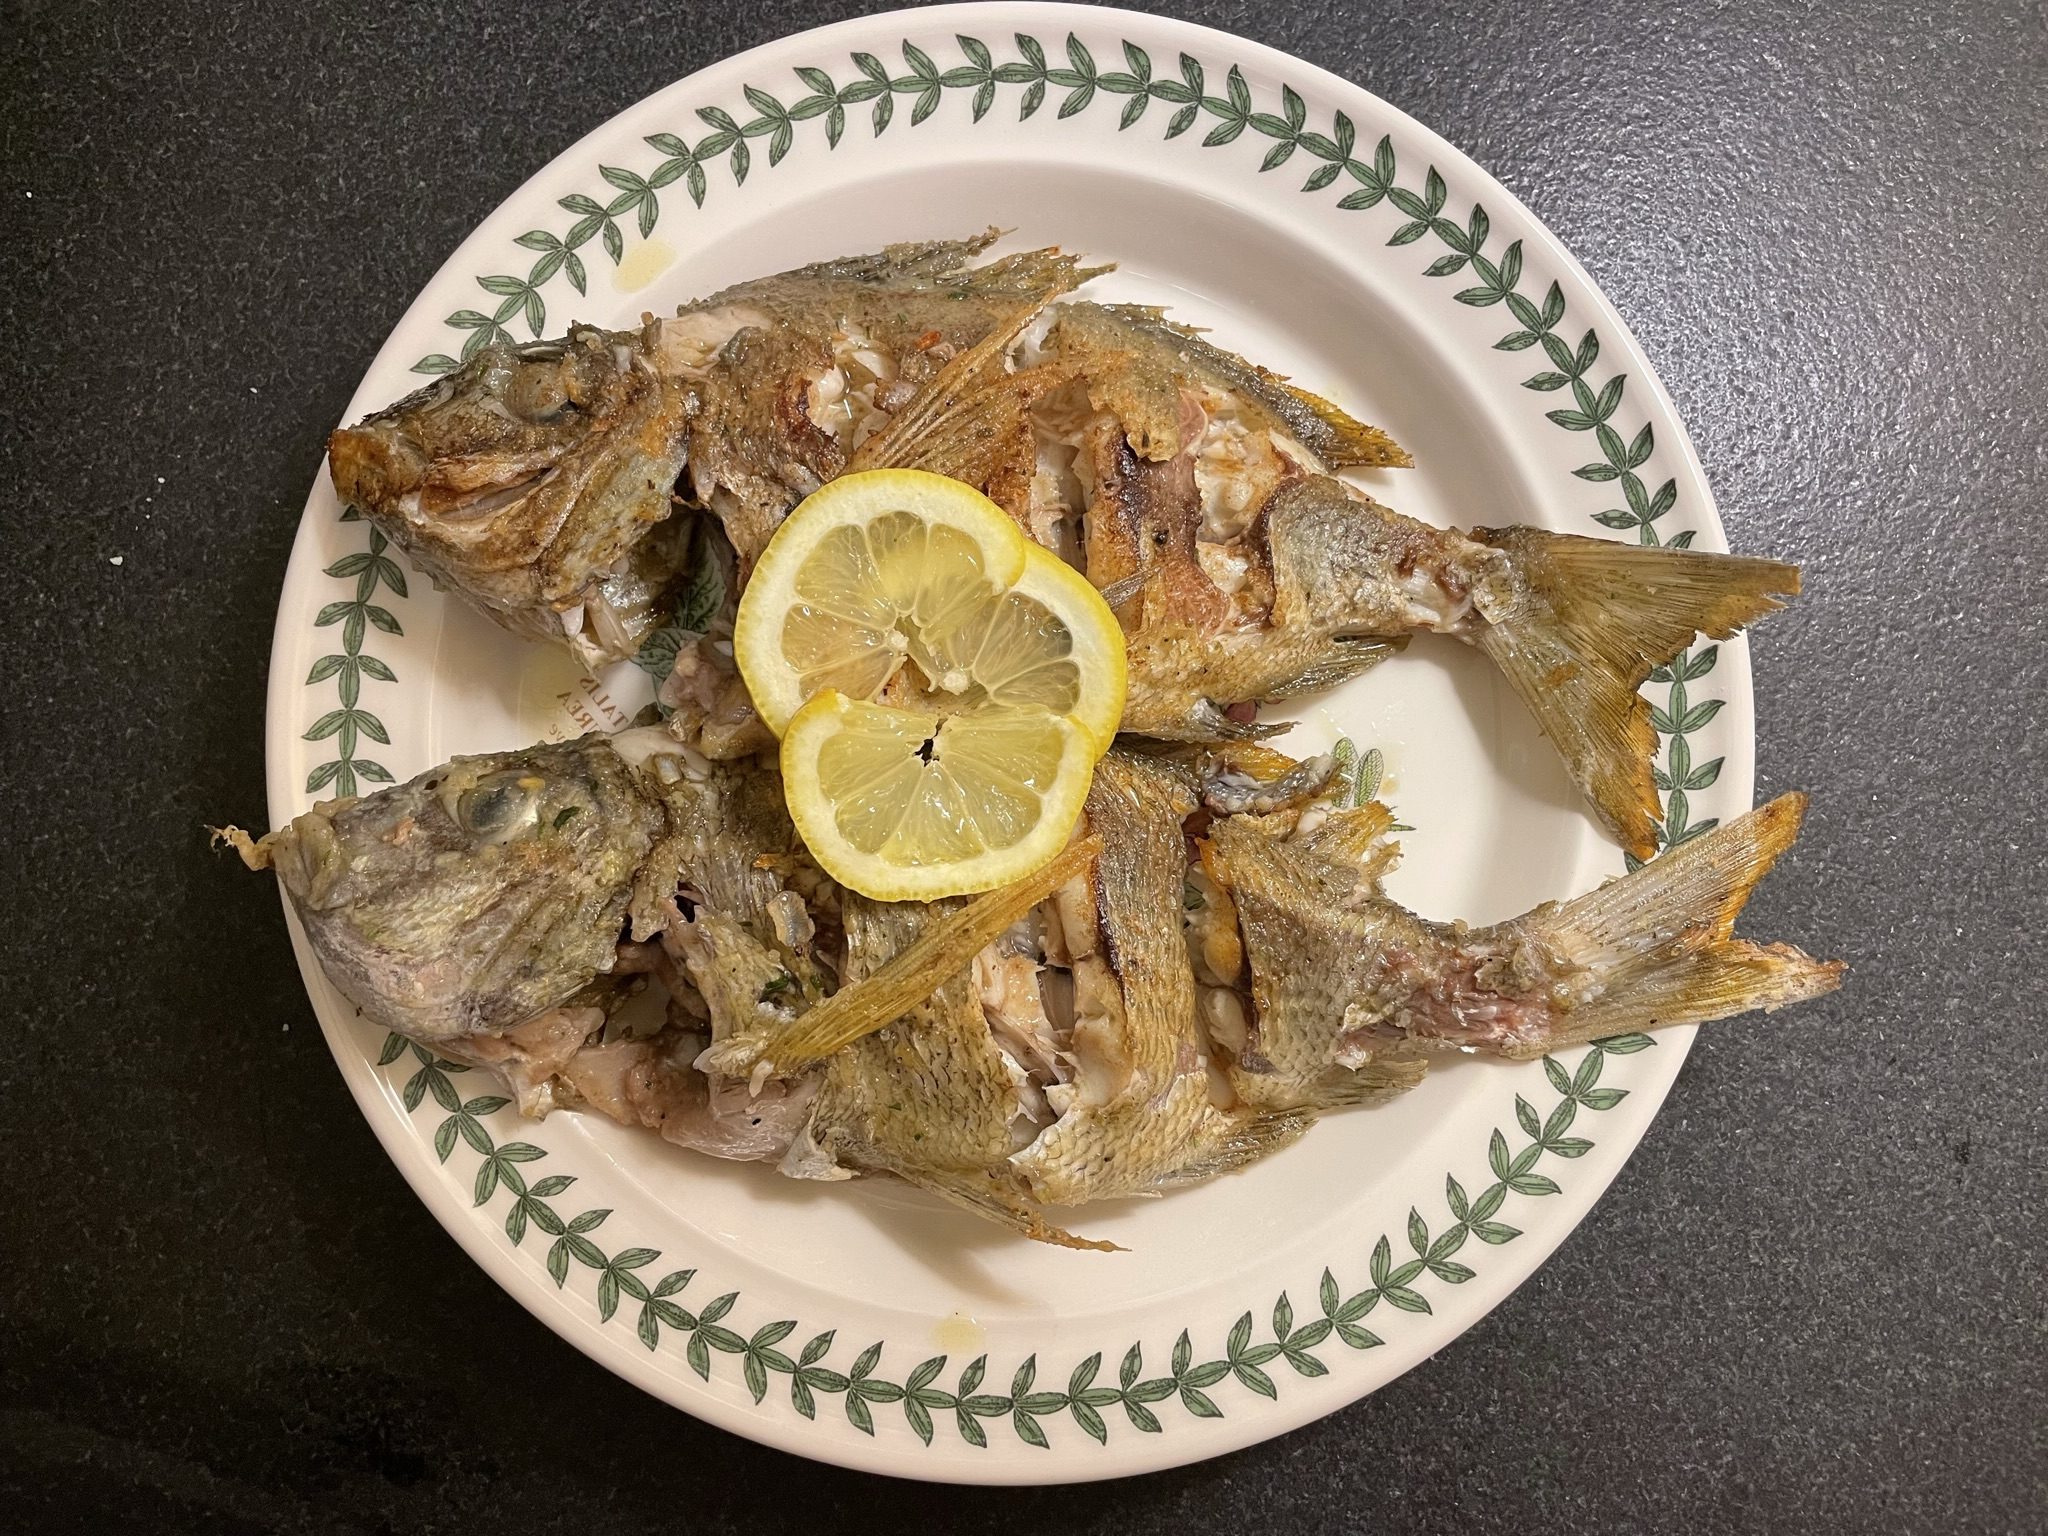 Porgies simply fried in olive oil and butter